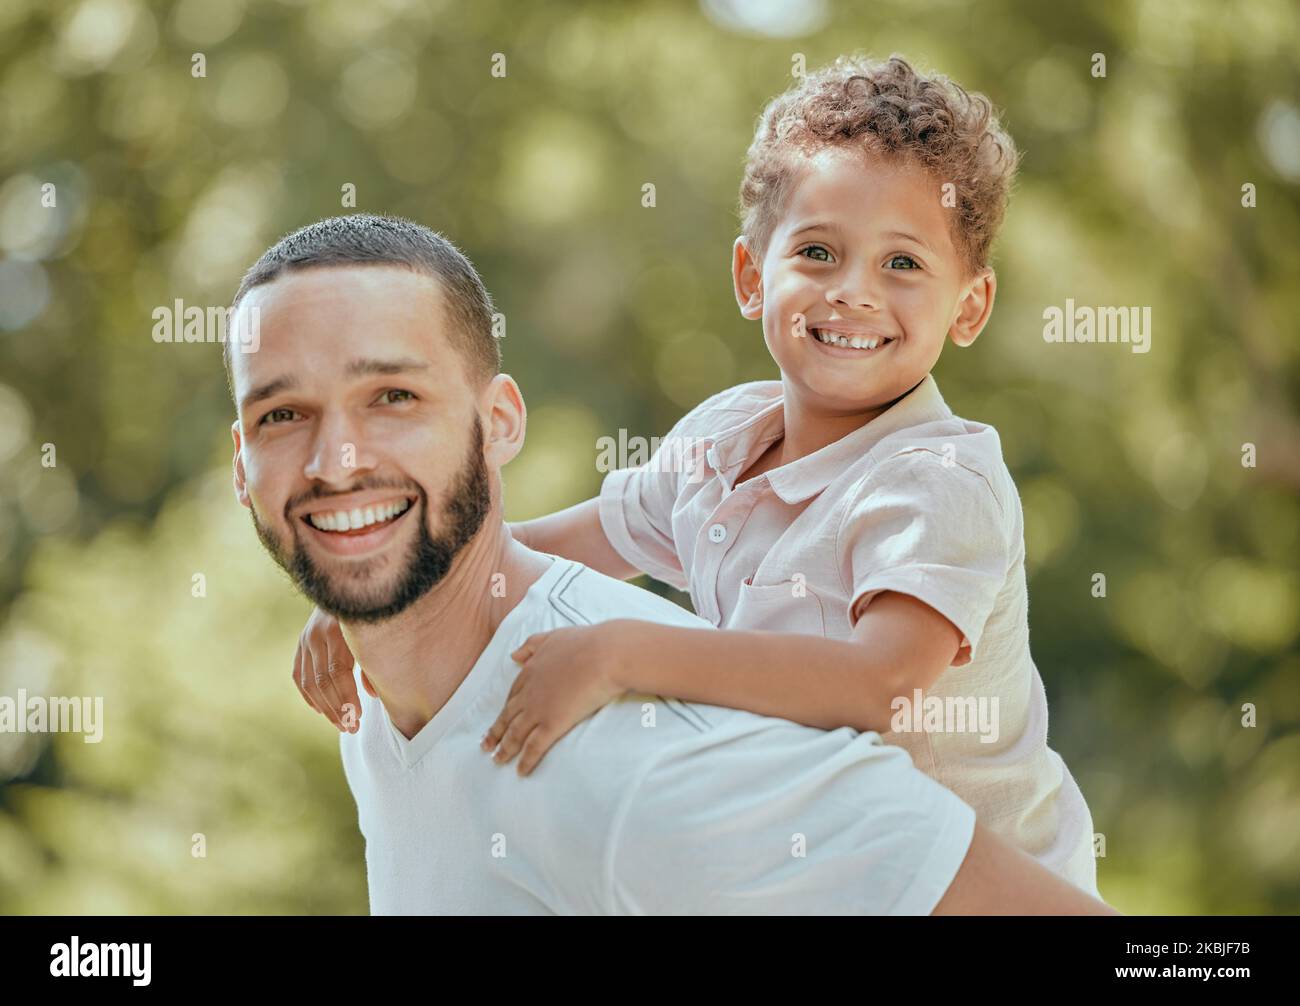 Dad, piggy back and child fun in nature with father and son bonding with quality time and happiness. Portrait of a happy dad and young kid together in Stock Photo